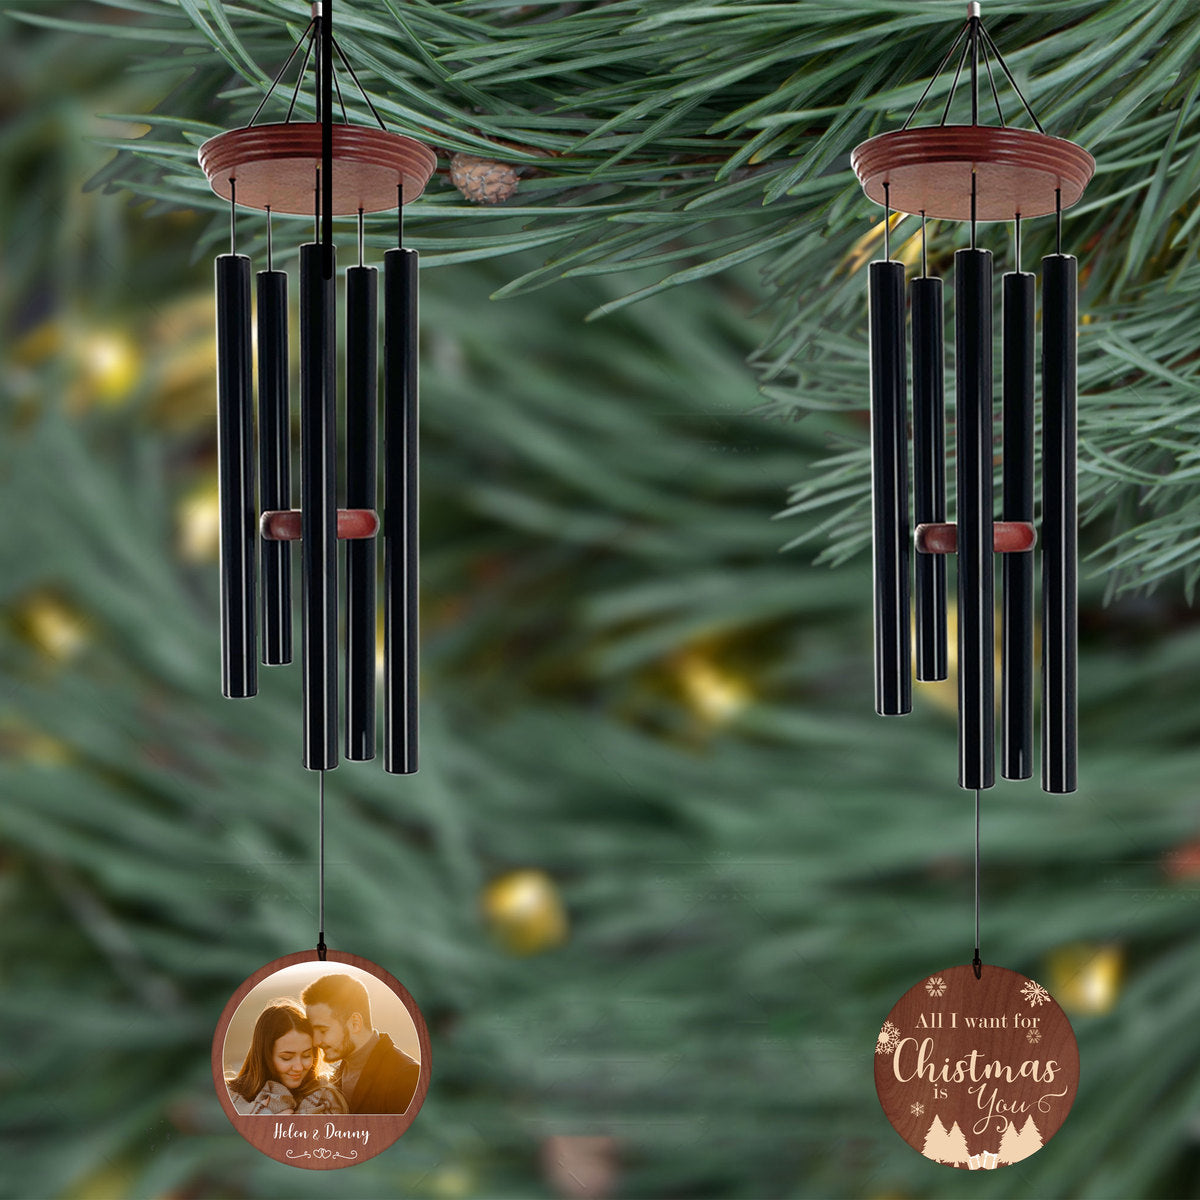 Personalized Anniversary  Wind Chime - 36 Inch, 5 Tubes, Anniversary Gift for Couples, Customize Anniversary Wind Chime Gift for Him/Her